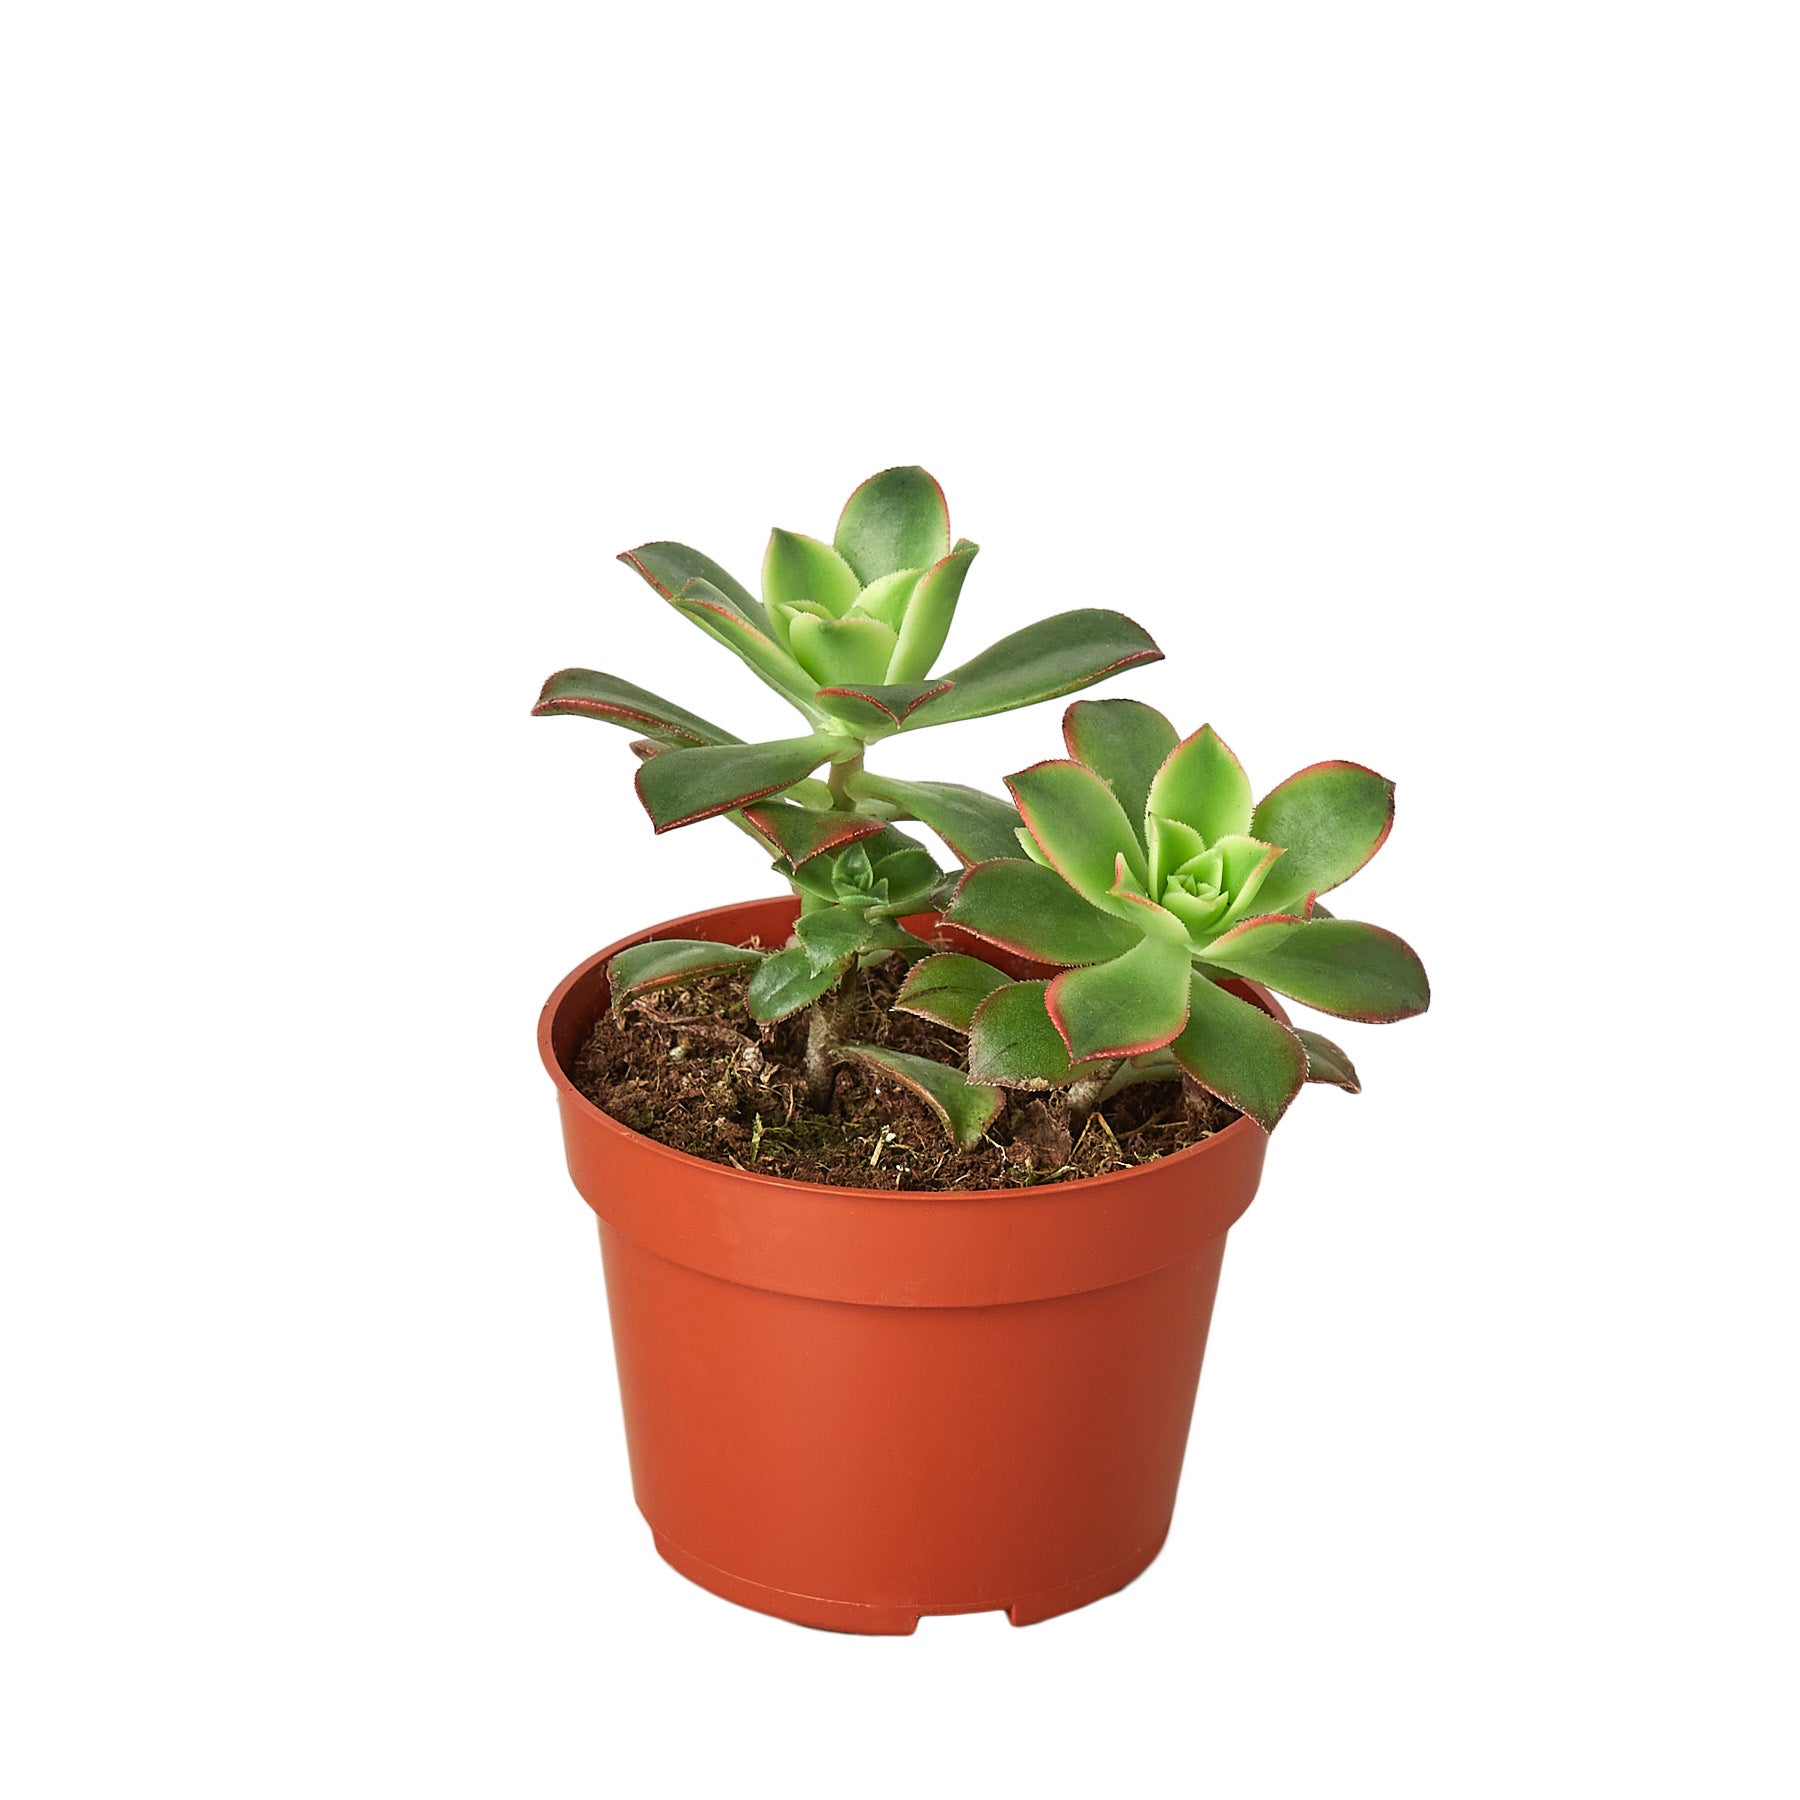 A succulent plant in a pot on a white background at the best garden center near me.